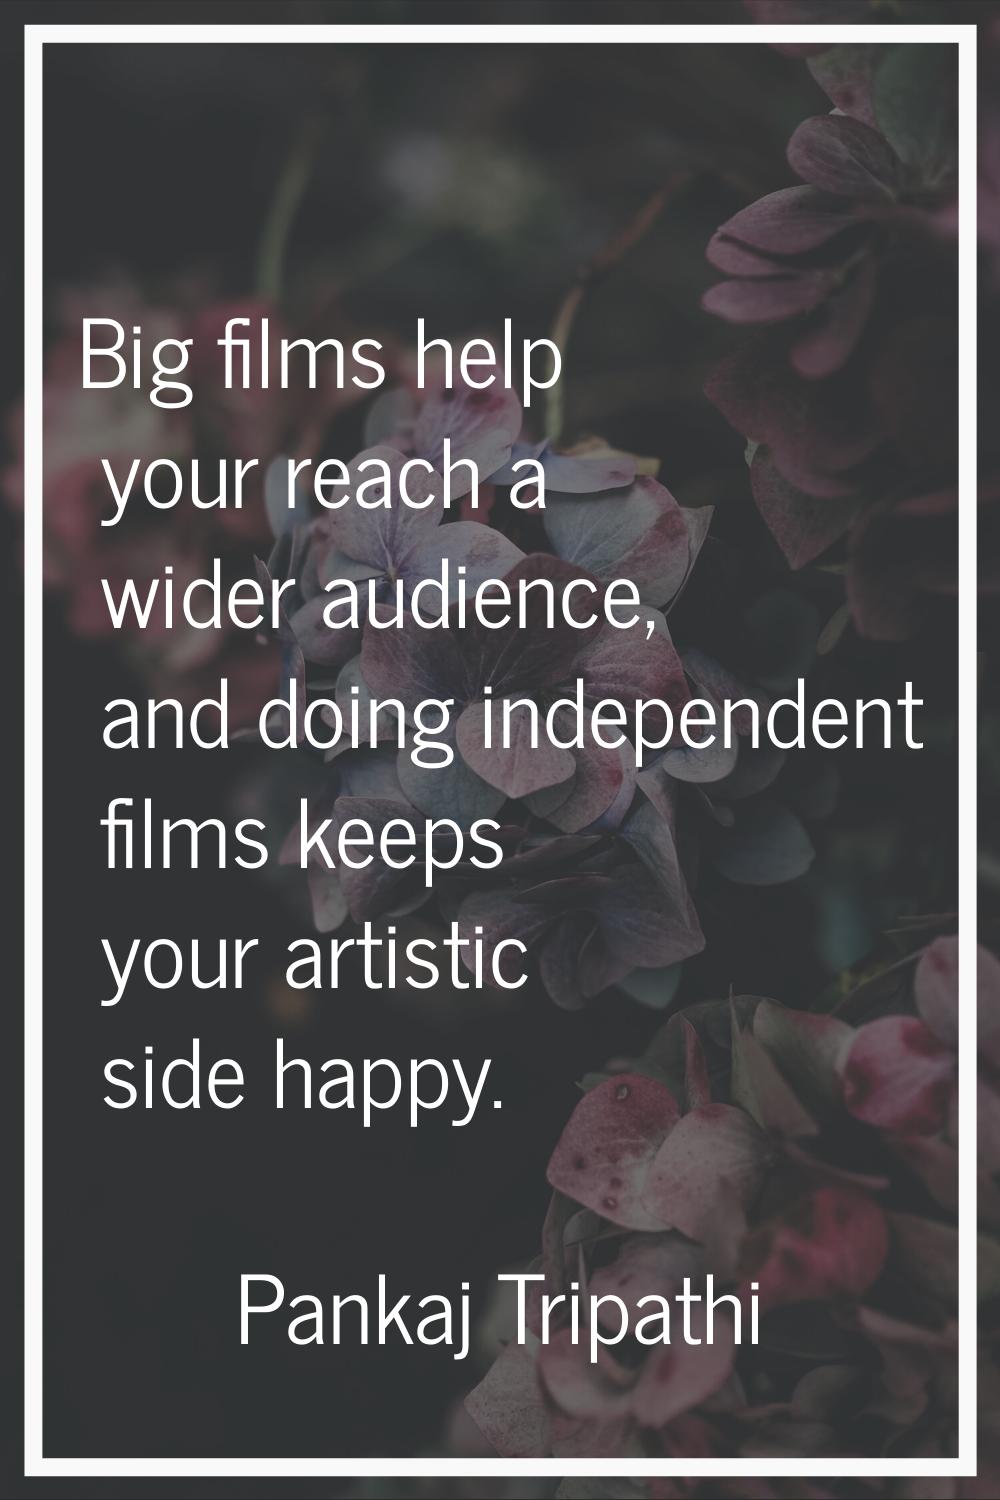 Big films help your reach a wider audience, and doing independent films keeps your artistic side ha